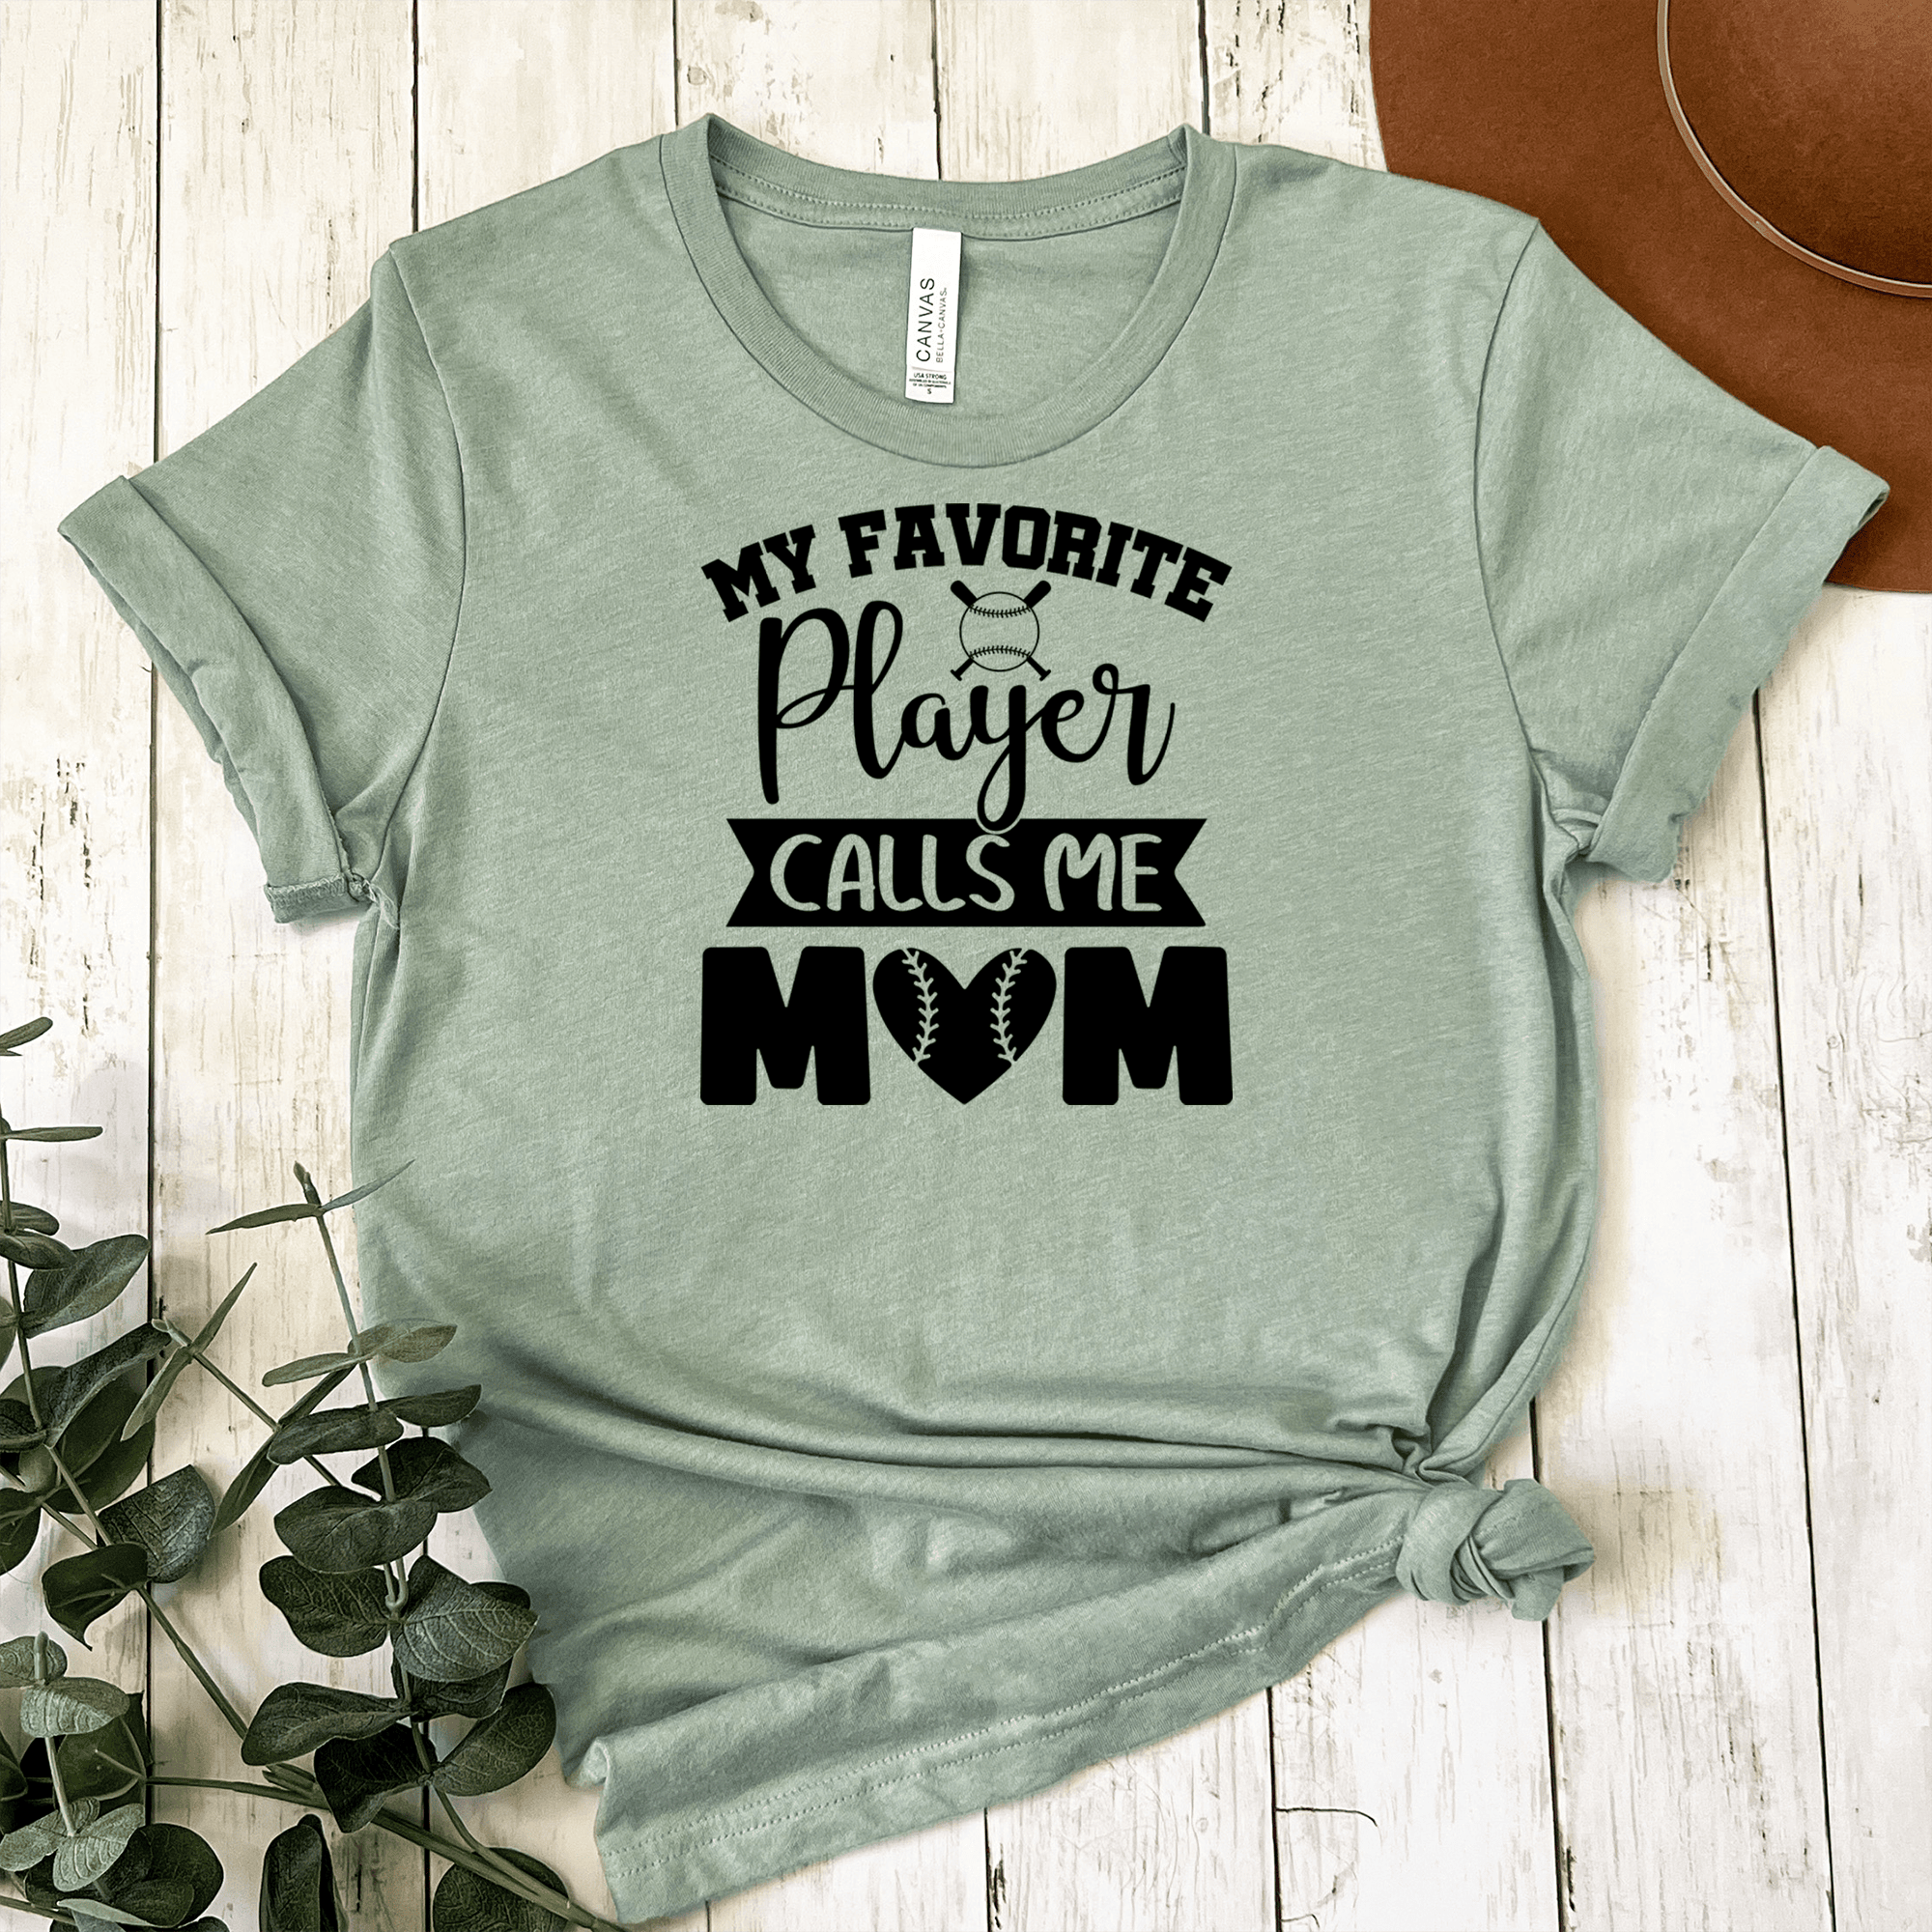 Womens Light Green T Shirt with My-Favorite-Athlete-Calls-Me-Mom design